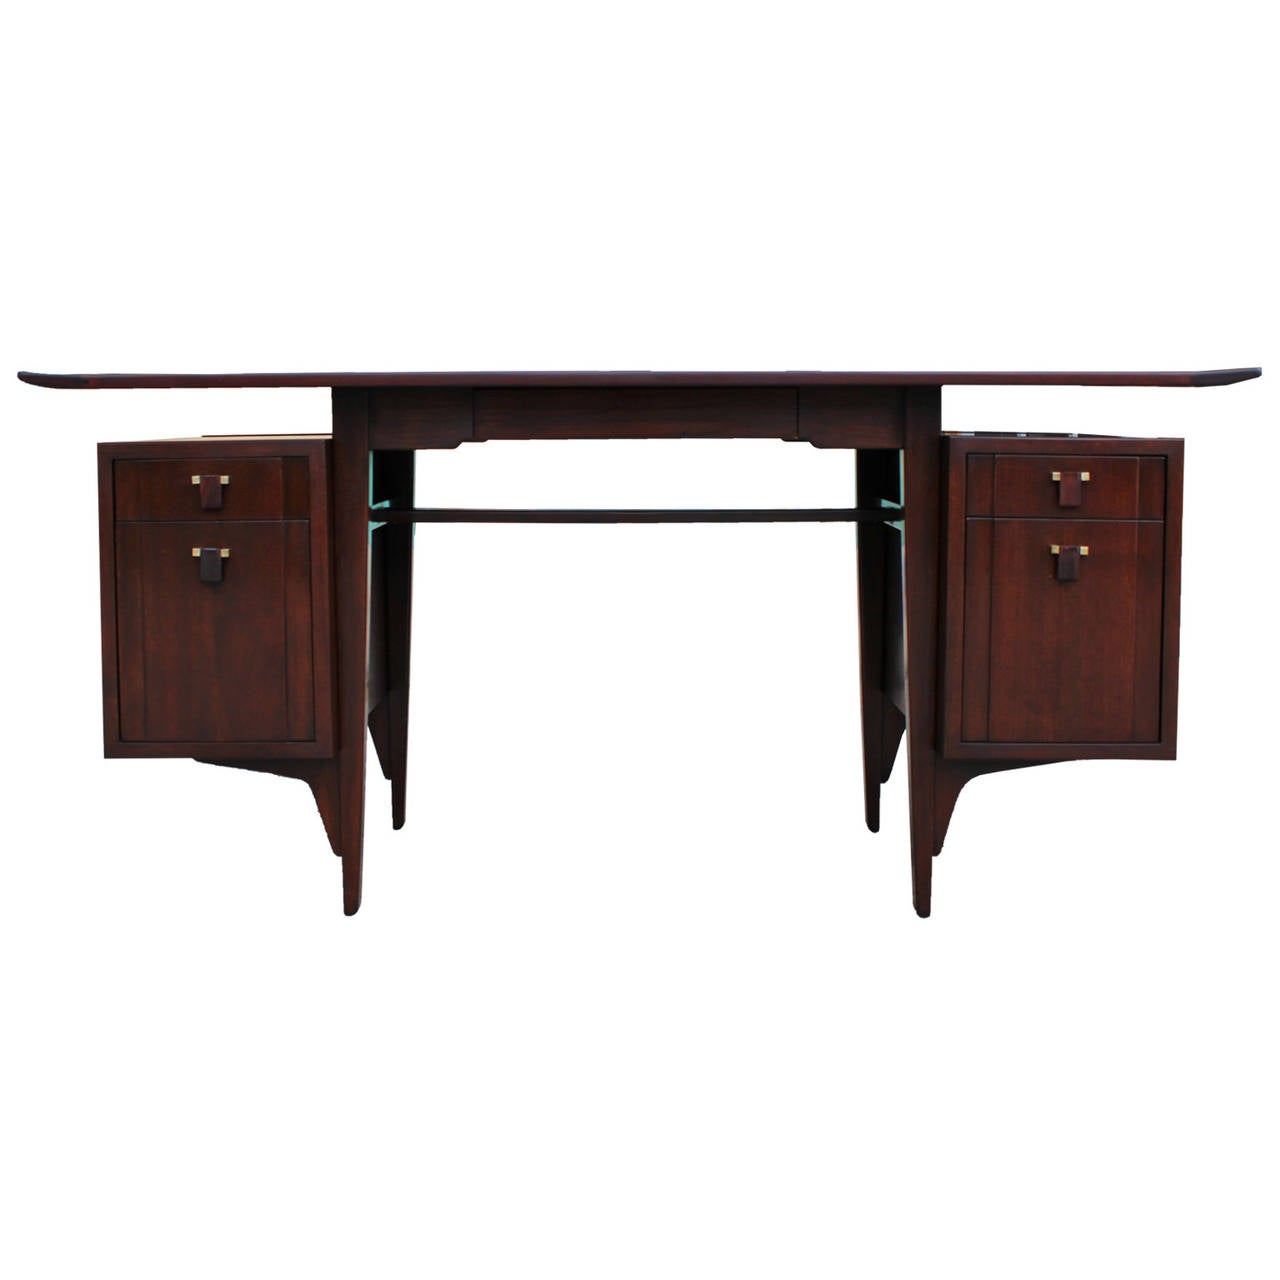 Stunning and rare desk by Edward Wormley for Dunbar mahogany desk. Desk features a slightly upturned floating top. Desk has five drawers. The four drawers on either side are accented with brass and rosewood pulls.